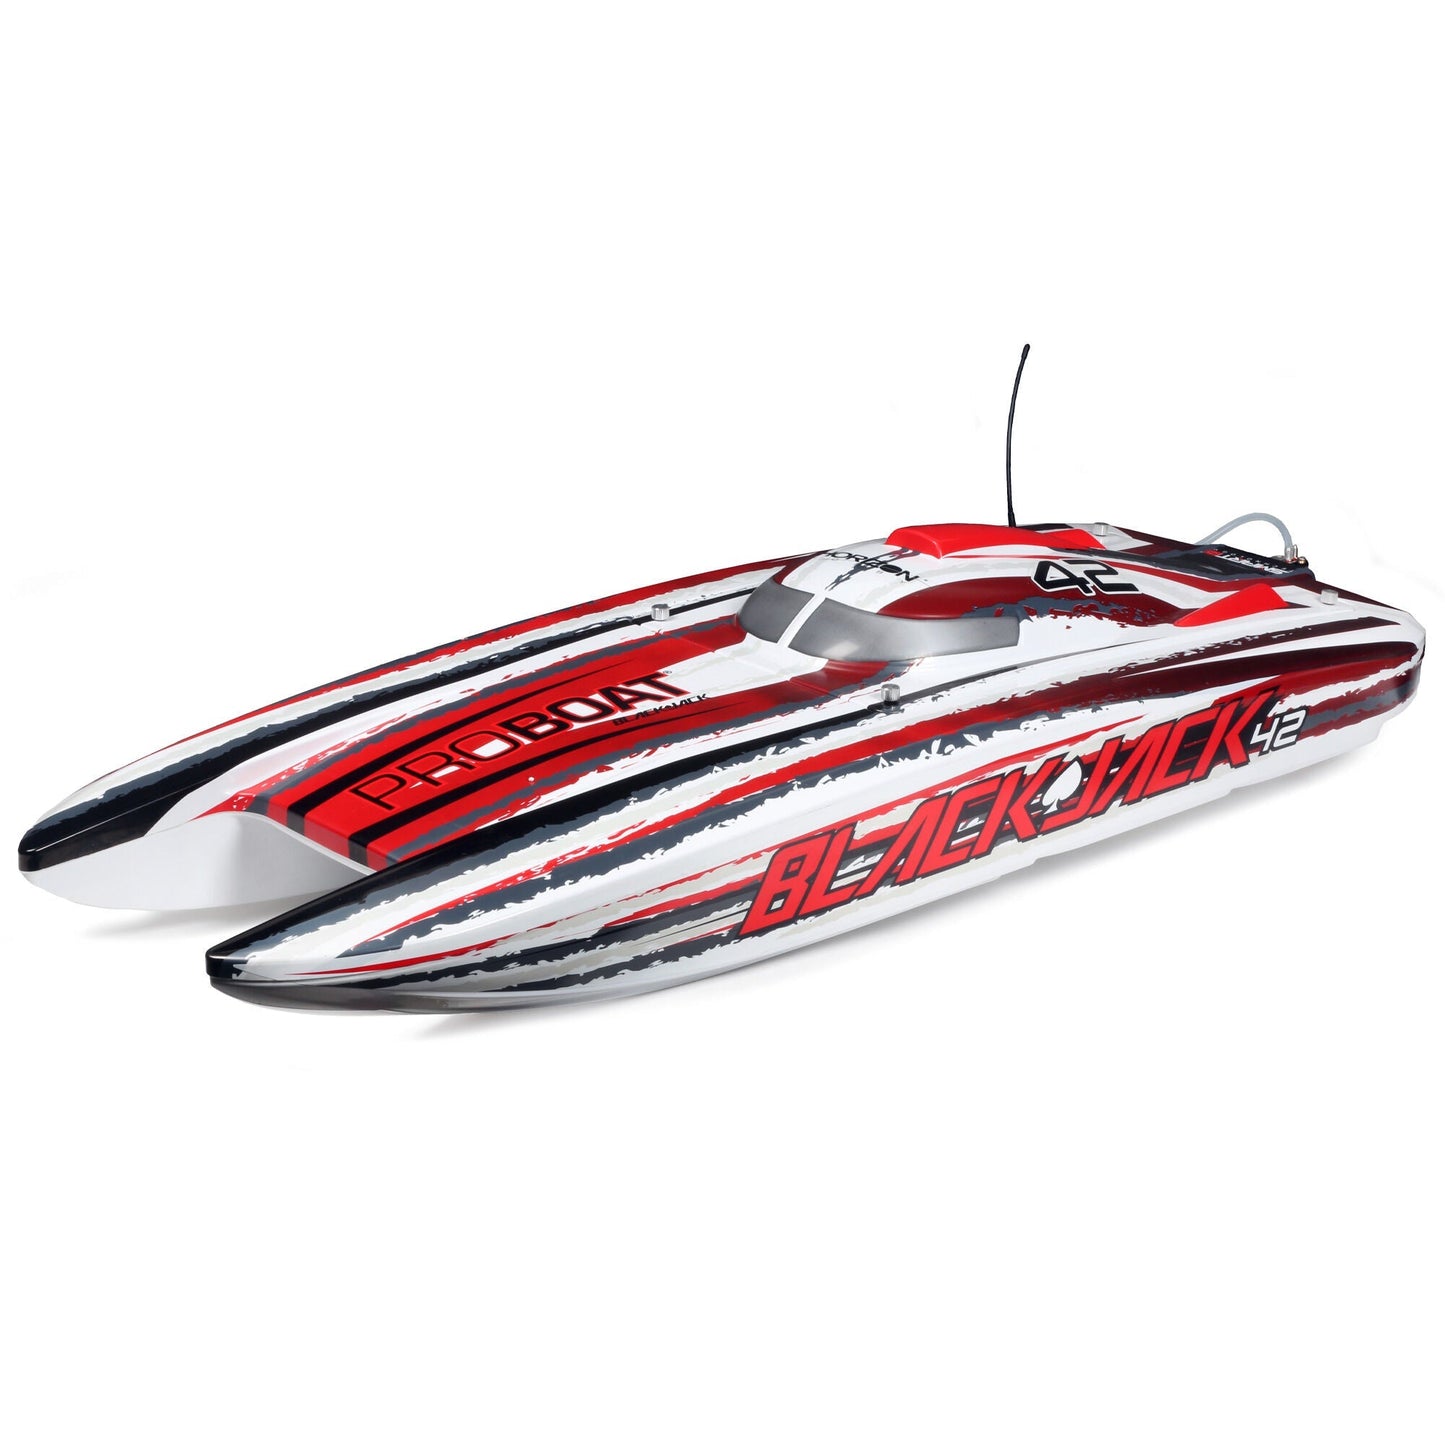 ProBoat Blackjack 42" 8S Brushless Catamaran RTR: (White/Red) PRB08043T2 - Dirt Cheap RC SAVING YOU MONEY, ONE PART AT A TIME